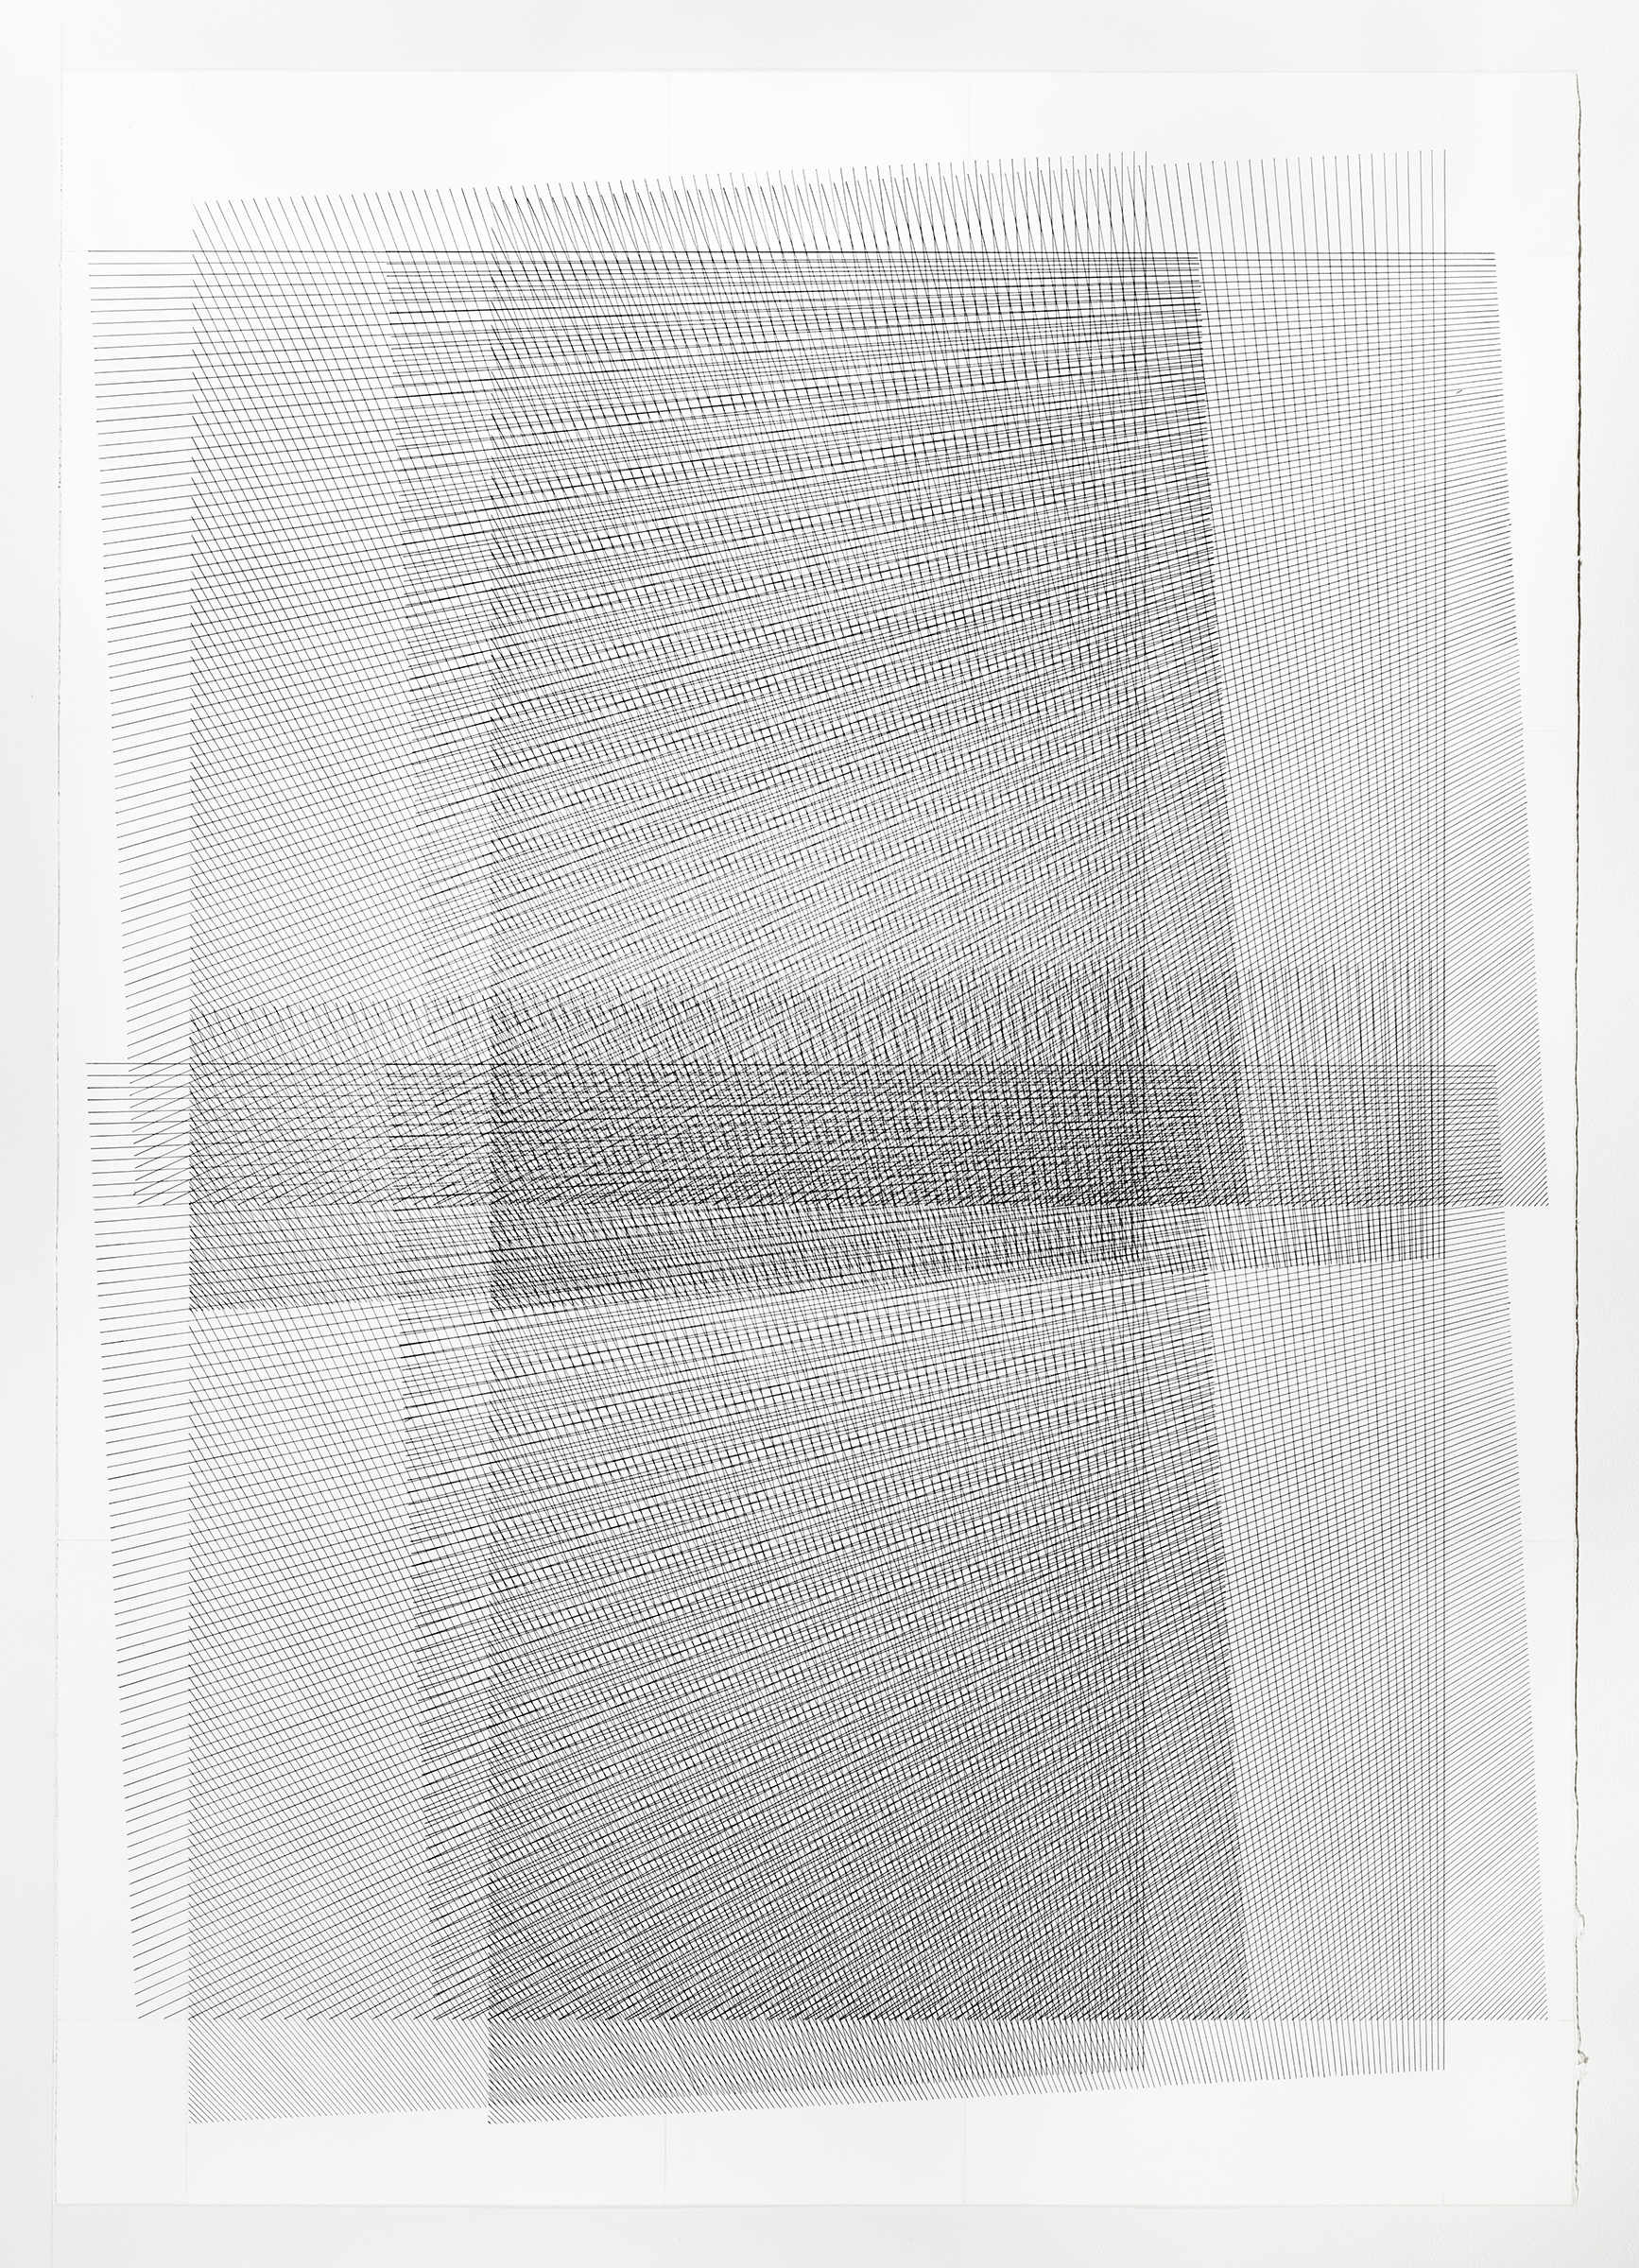 3 of 5; additive series, grey, 40 x 30 inches, 2016